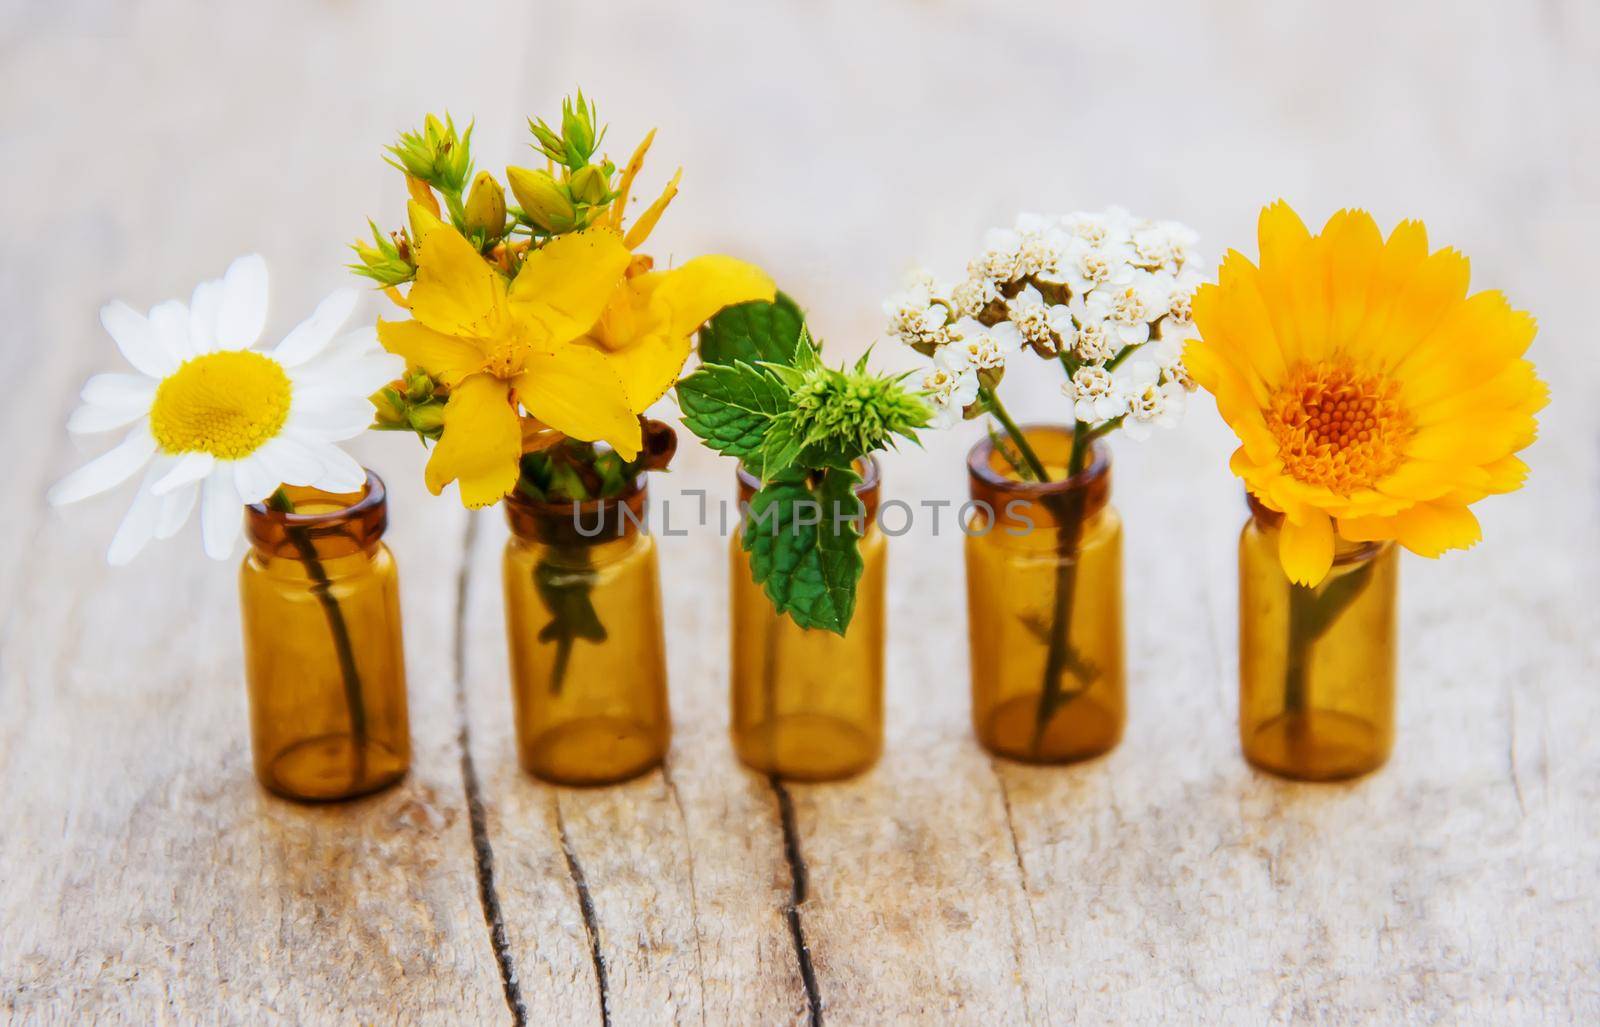 extracts of herbs in small bottles. Selective focus. nature.